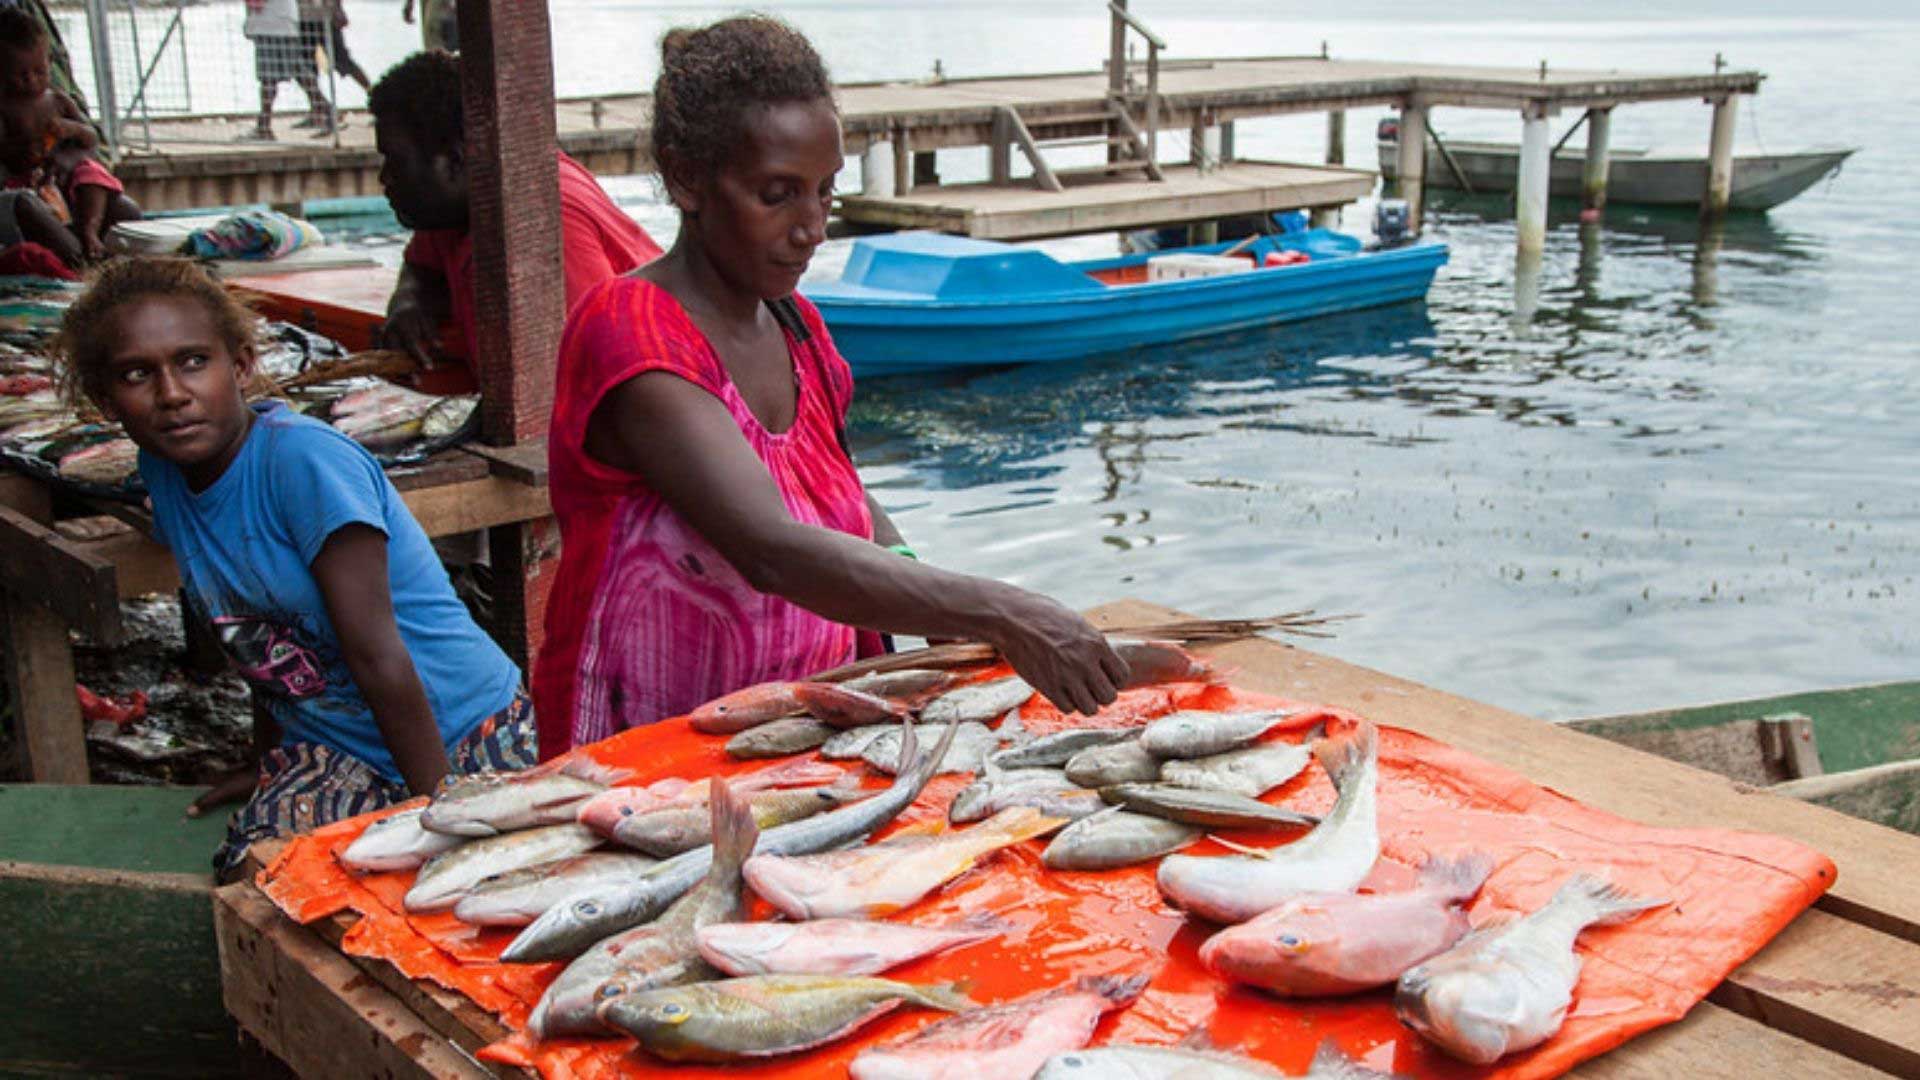 Women with reef fish for sale at Gizo market, by the ocean, Western Province, Solomon Islands. Photo by Filip Milovac, WorldFish